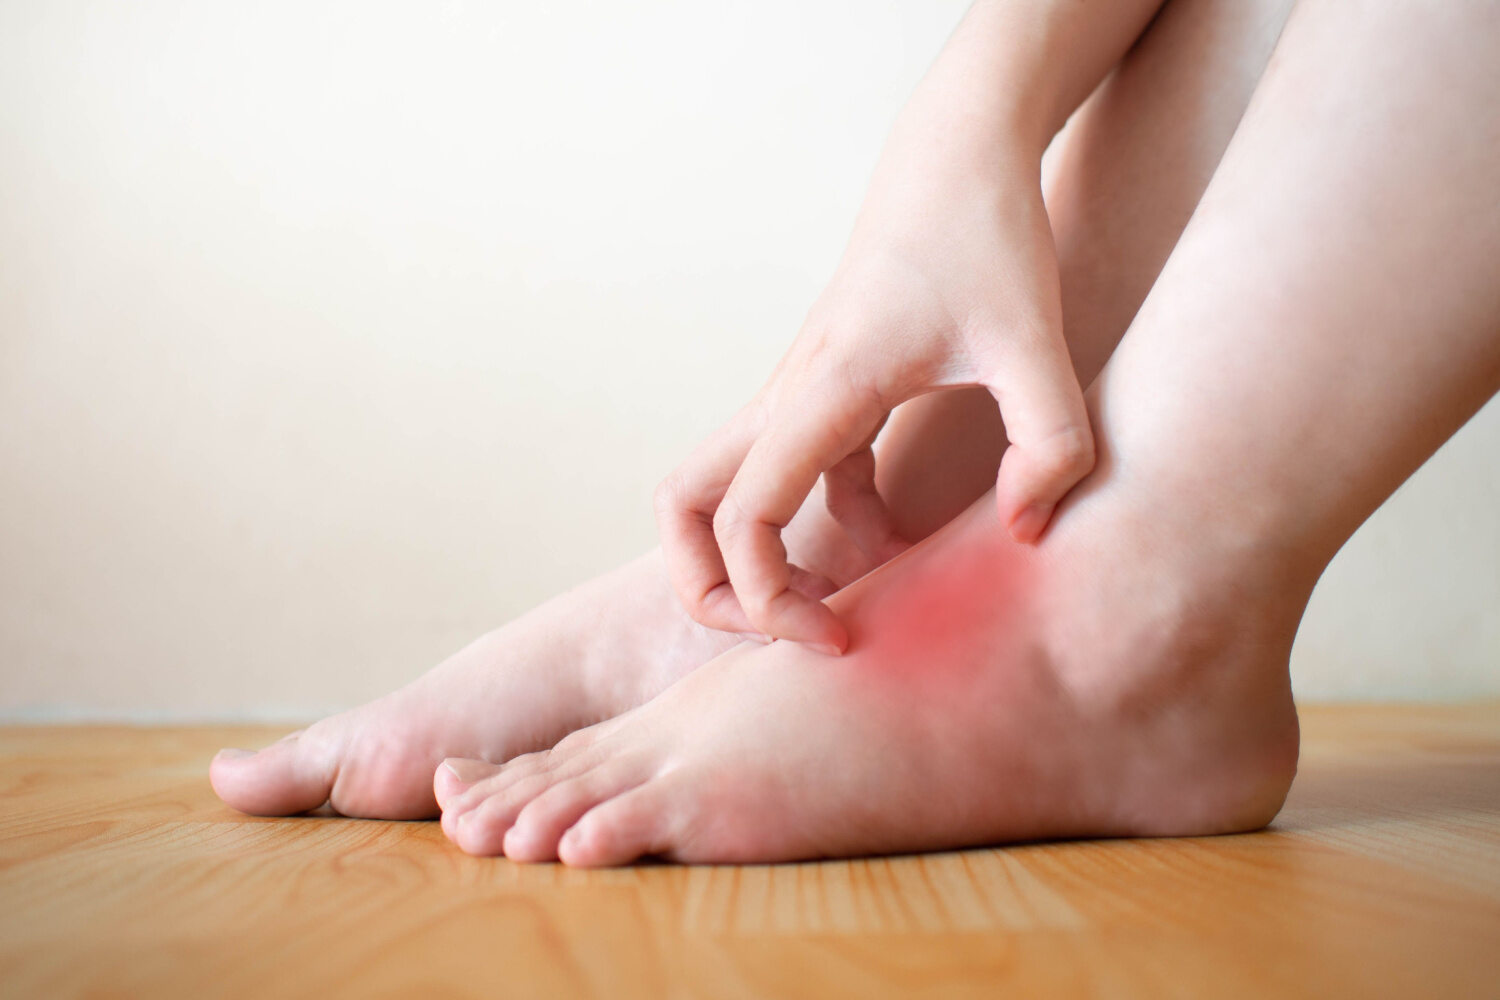 What are the symptoms of itchy feet during pregnancy?